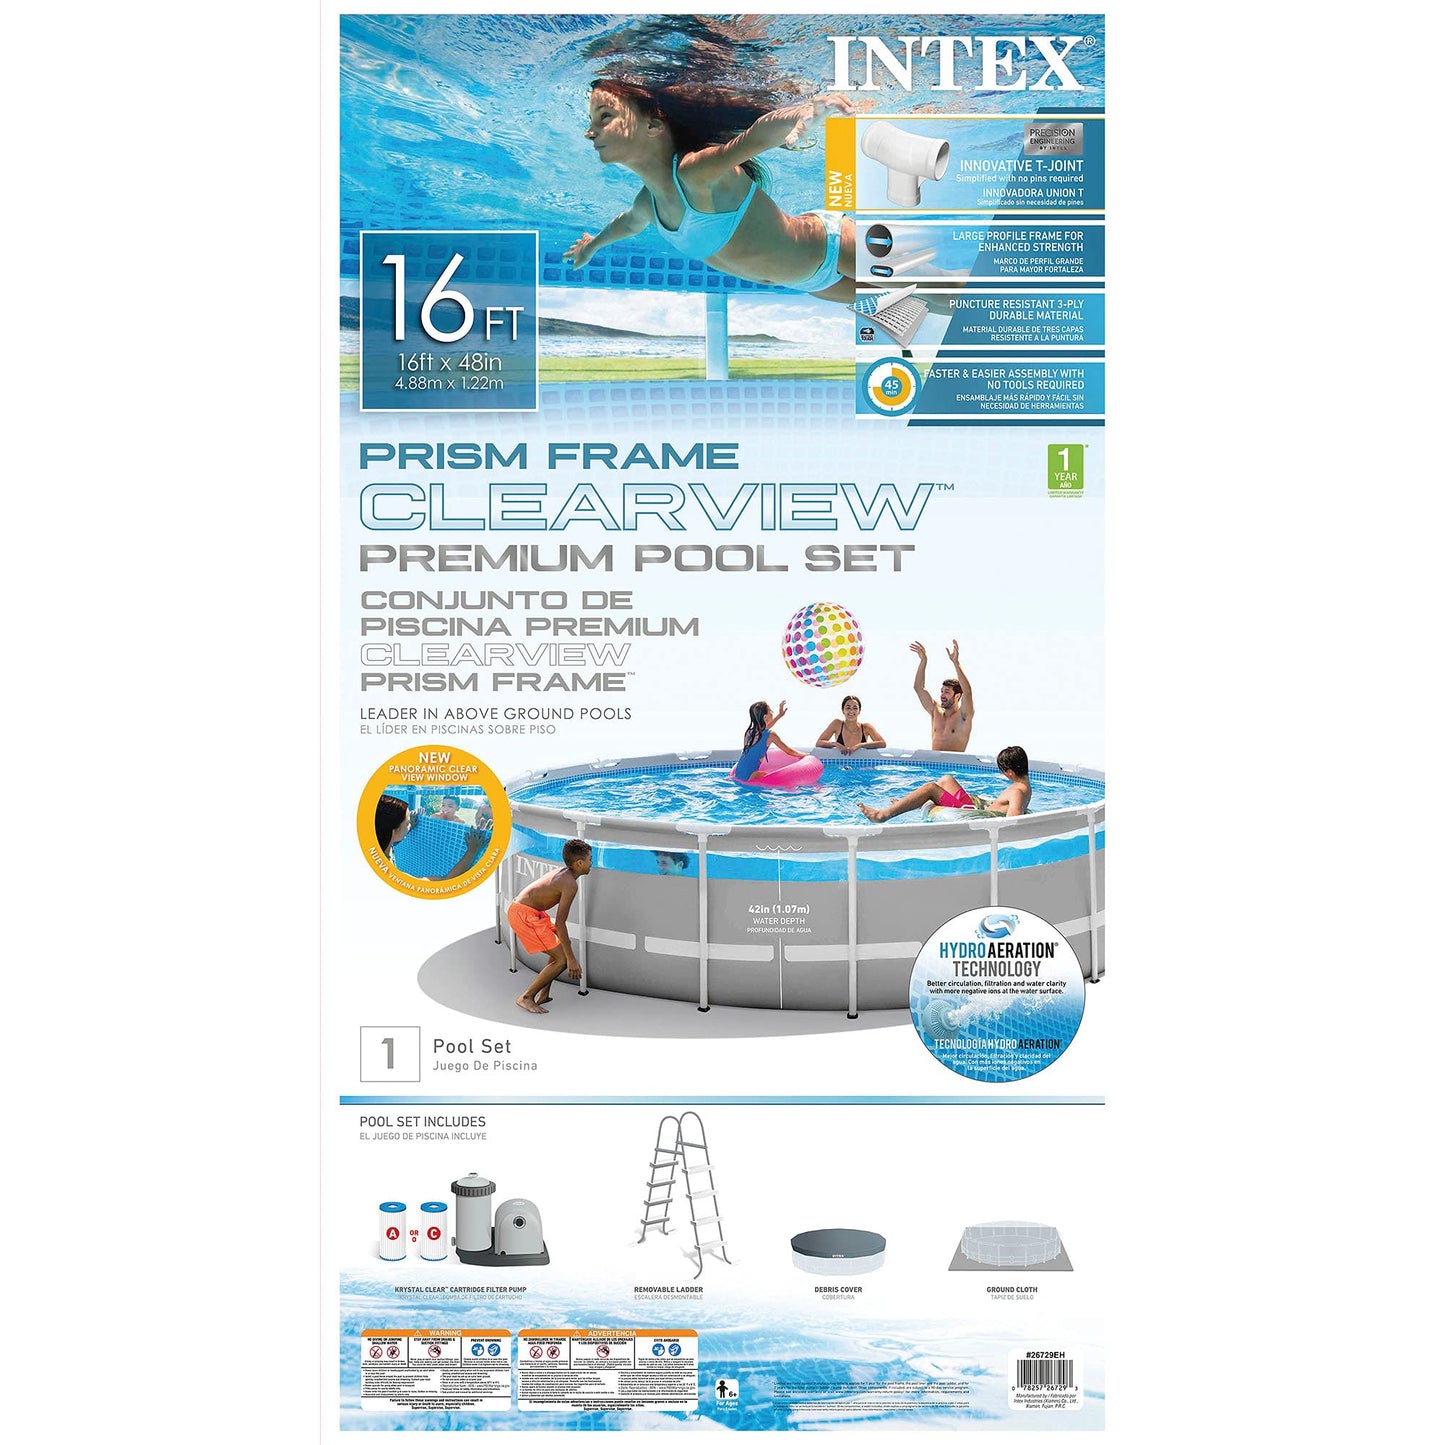 Intex 26729EH 16 Foot by 48 Inch Clearview Prism Frame Above Ground Swimming Pool with Filter Pump, Ladder, Cover, Ground Cloth & Robot Vacuum Cleaner